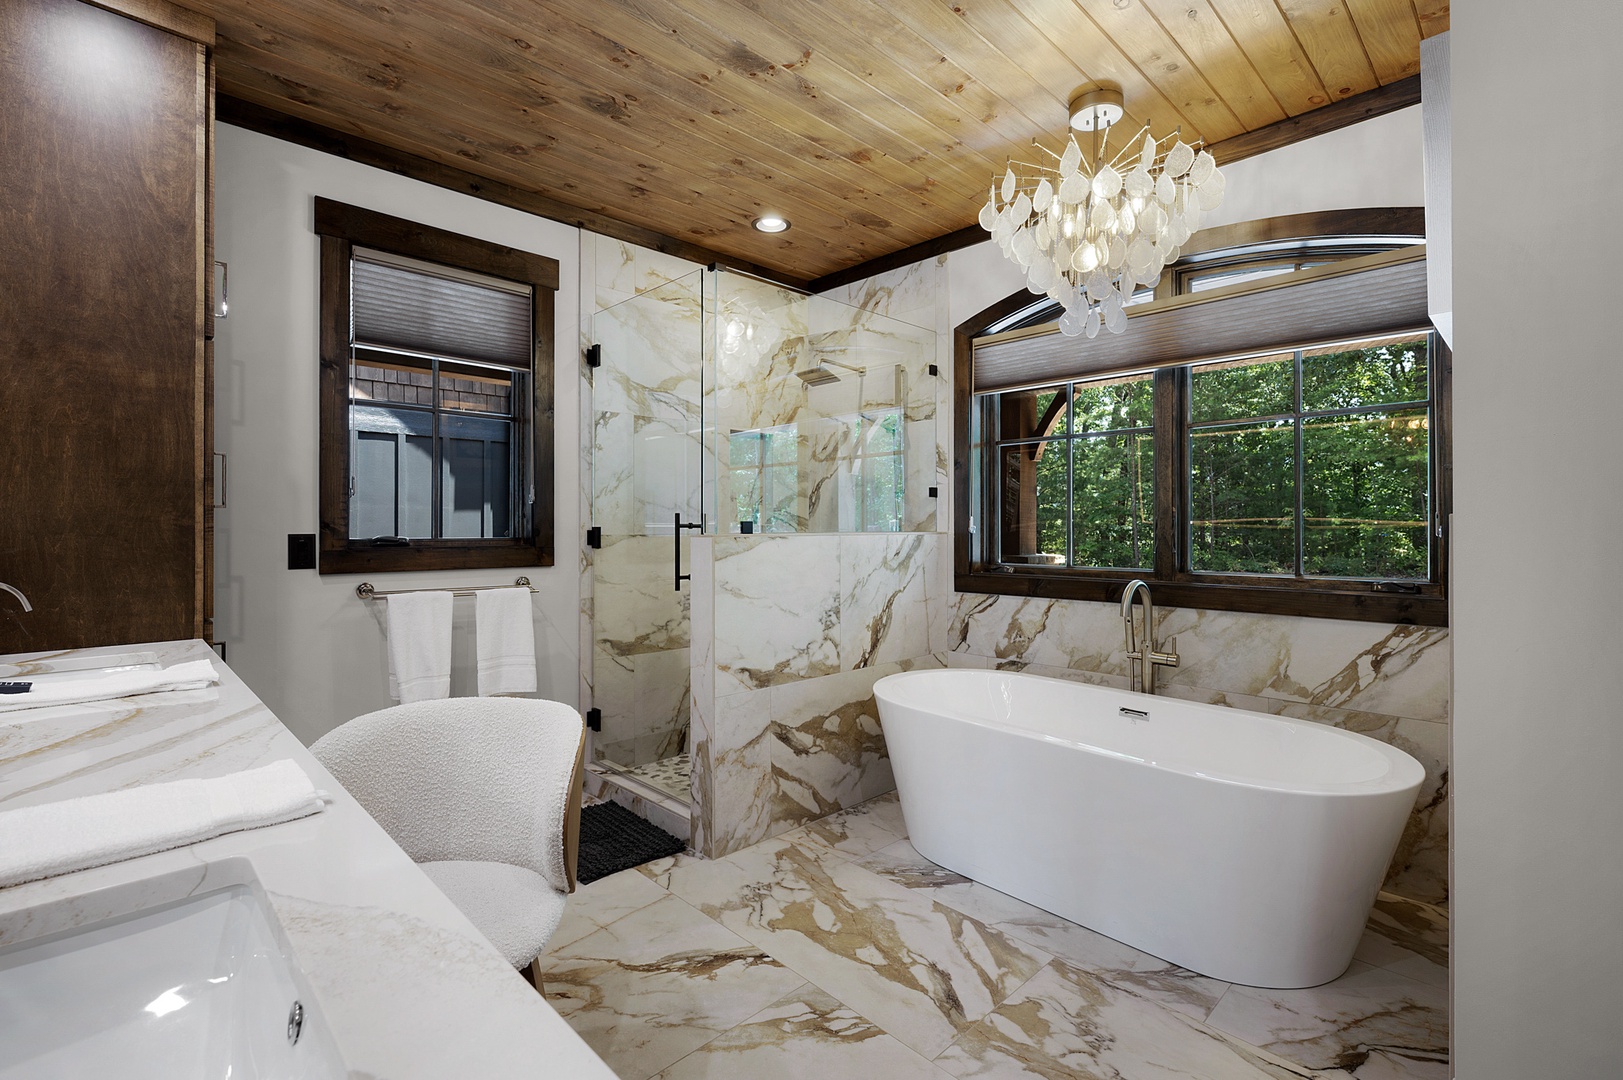 The Sanctuary: Entry Level Primary Luxurious King Bedroom's Private Bathroom